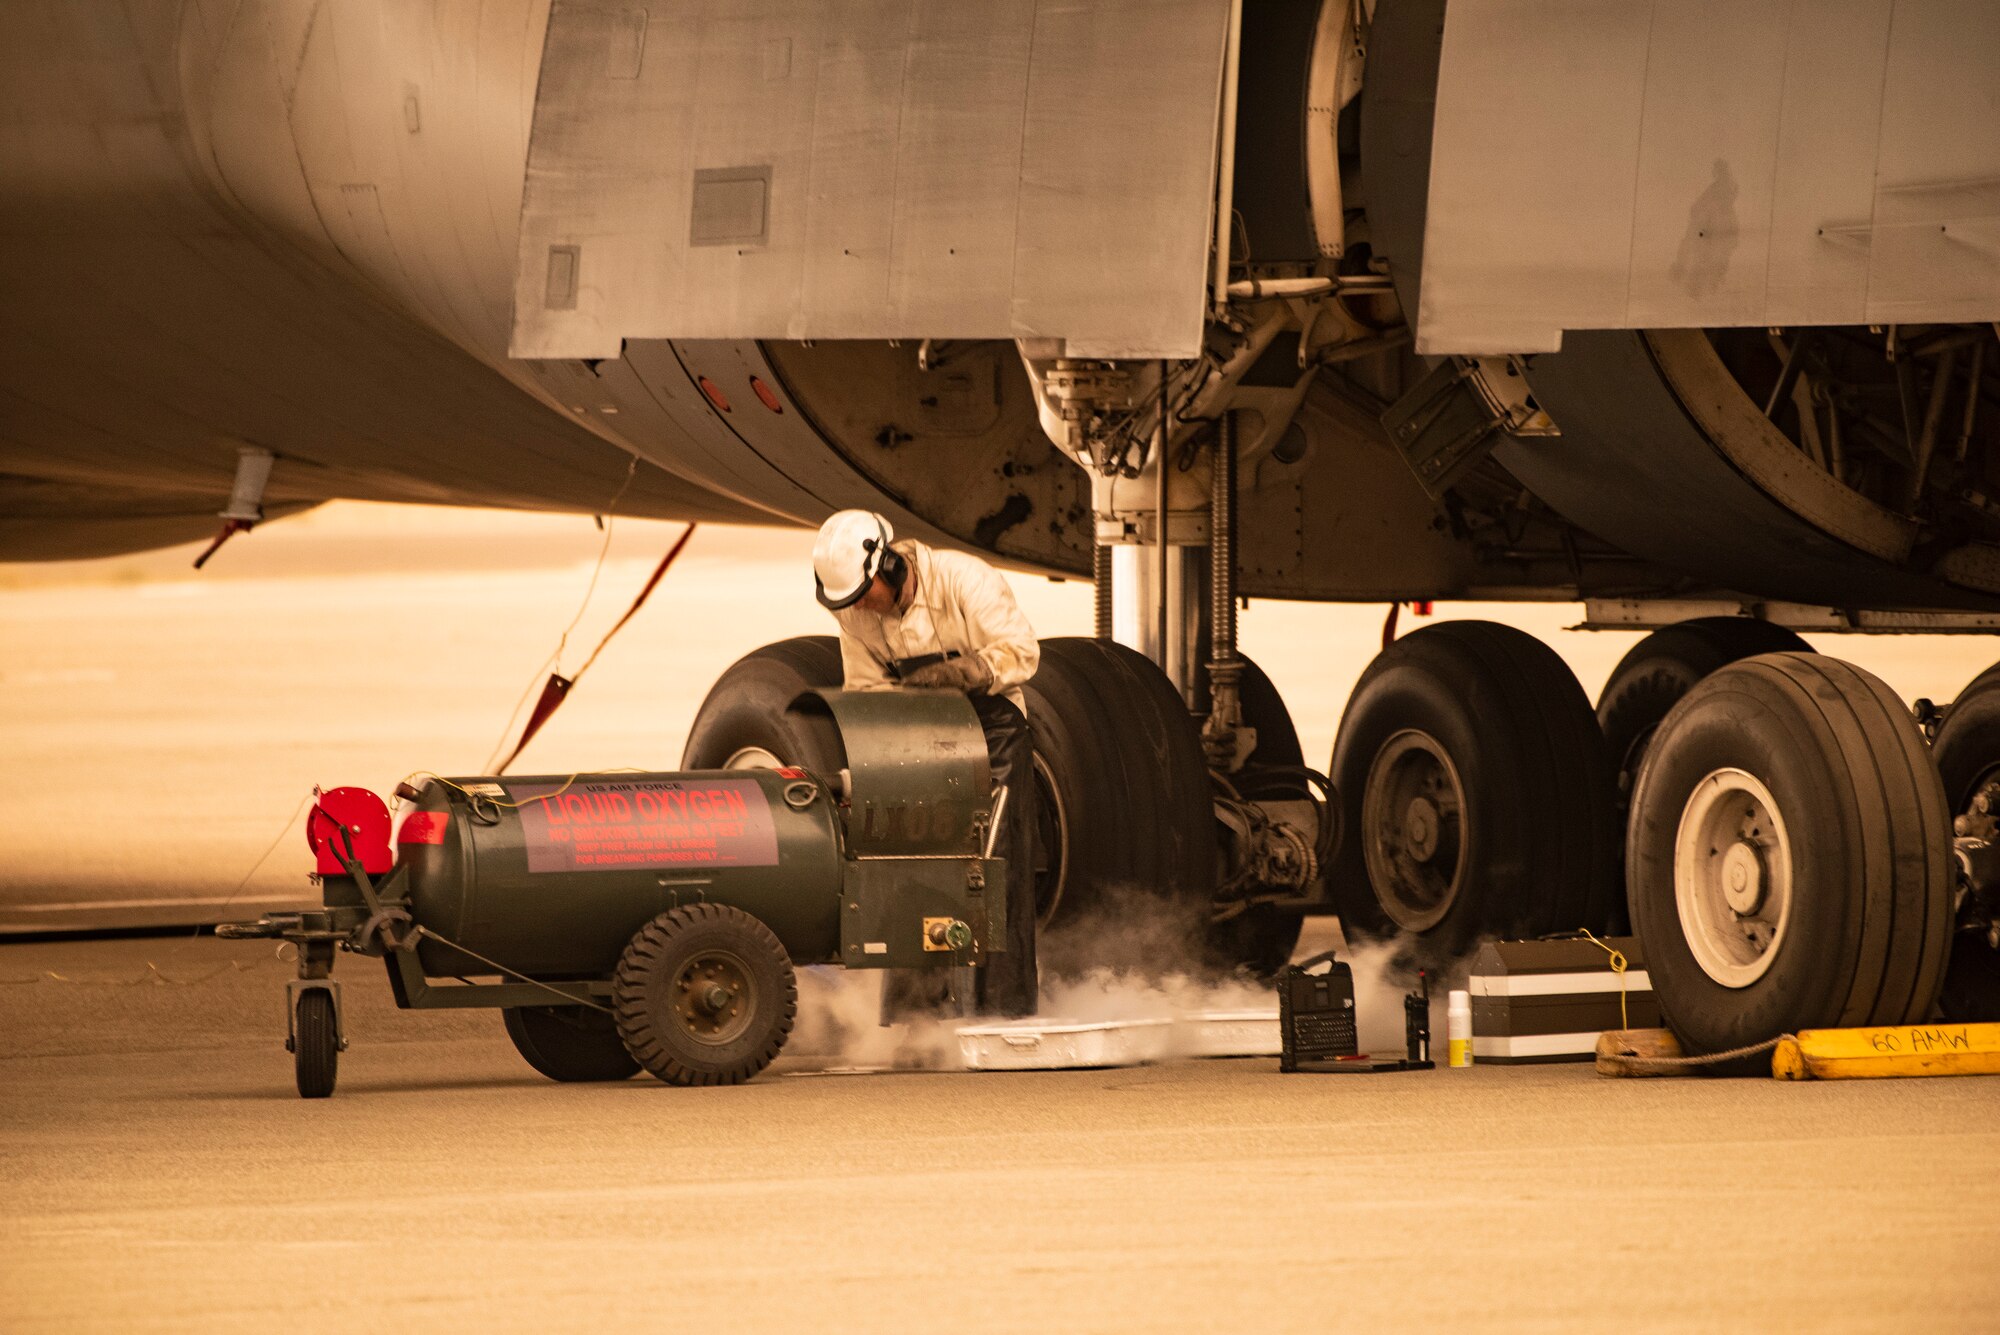 U.S. Air Force Airman 1st Class Ricardo Puente, 60th Aircraft Maintenance Squadron crew chief, services the oxygen system of a C-5M Super Galaxy Sept. 9, 2020 at Travis Air Force Base, California. Wildfires across California propelled smoke and ash into the troposphere, impacting air quality. (U.S. Air Force photo by Heide Couch)